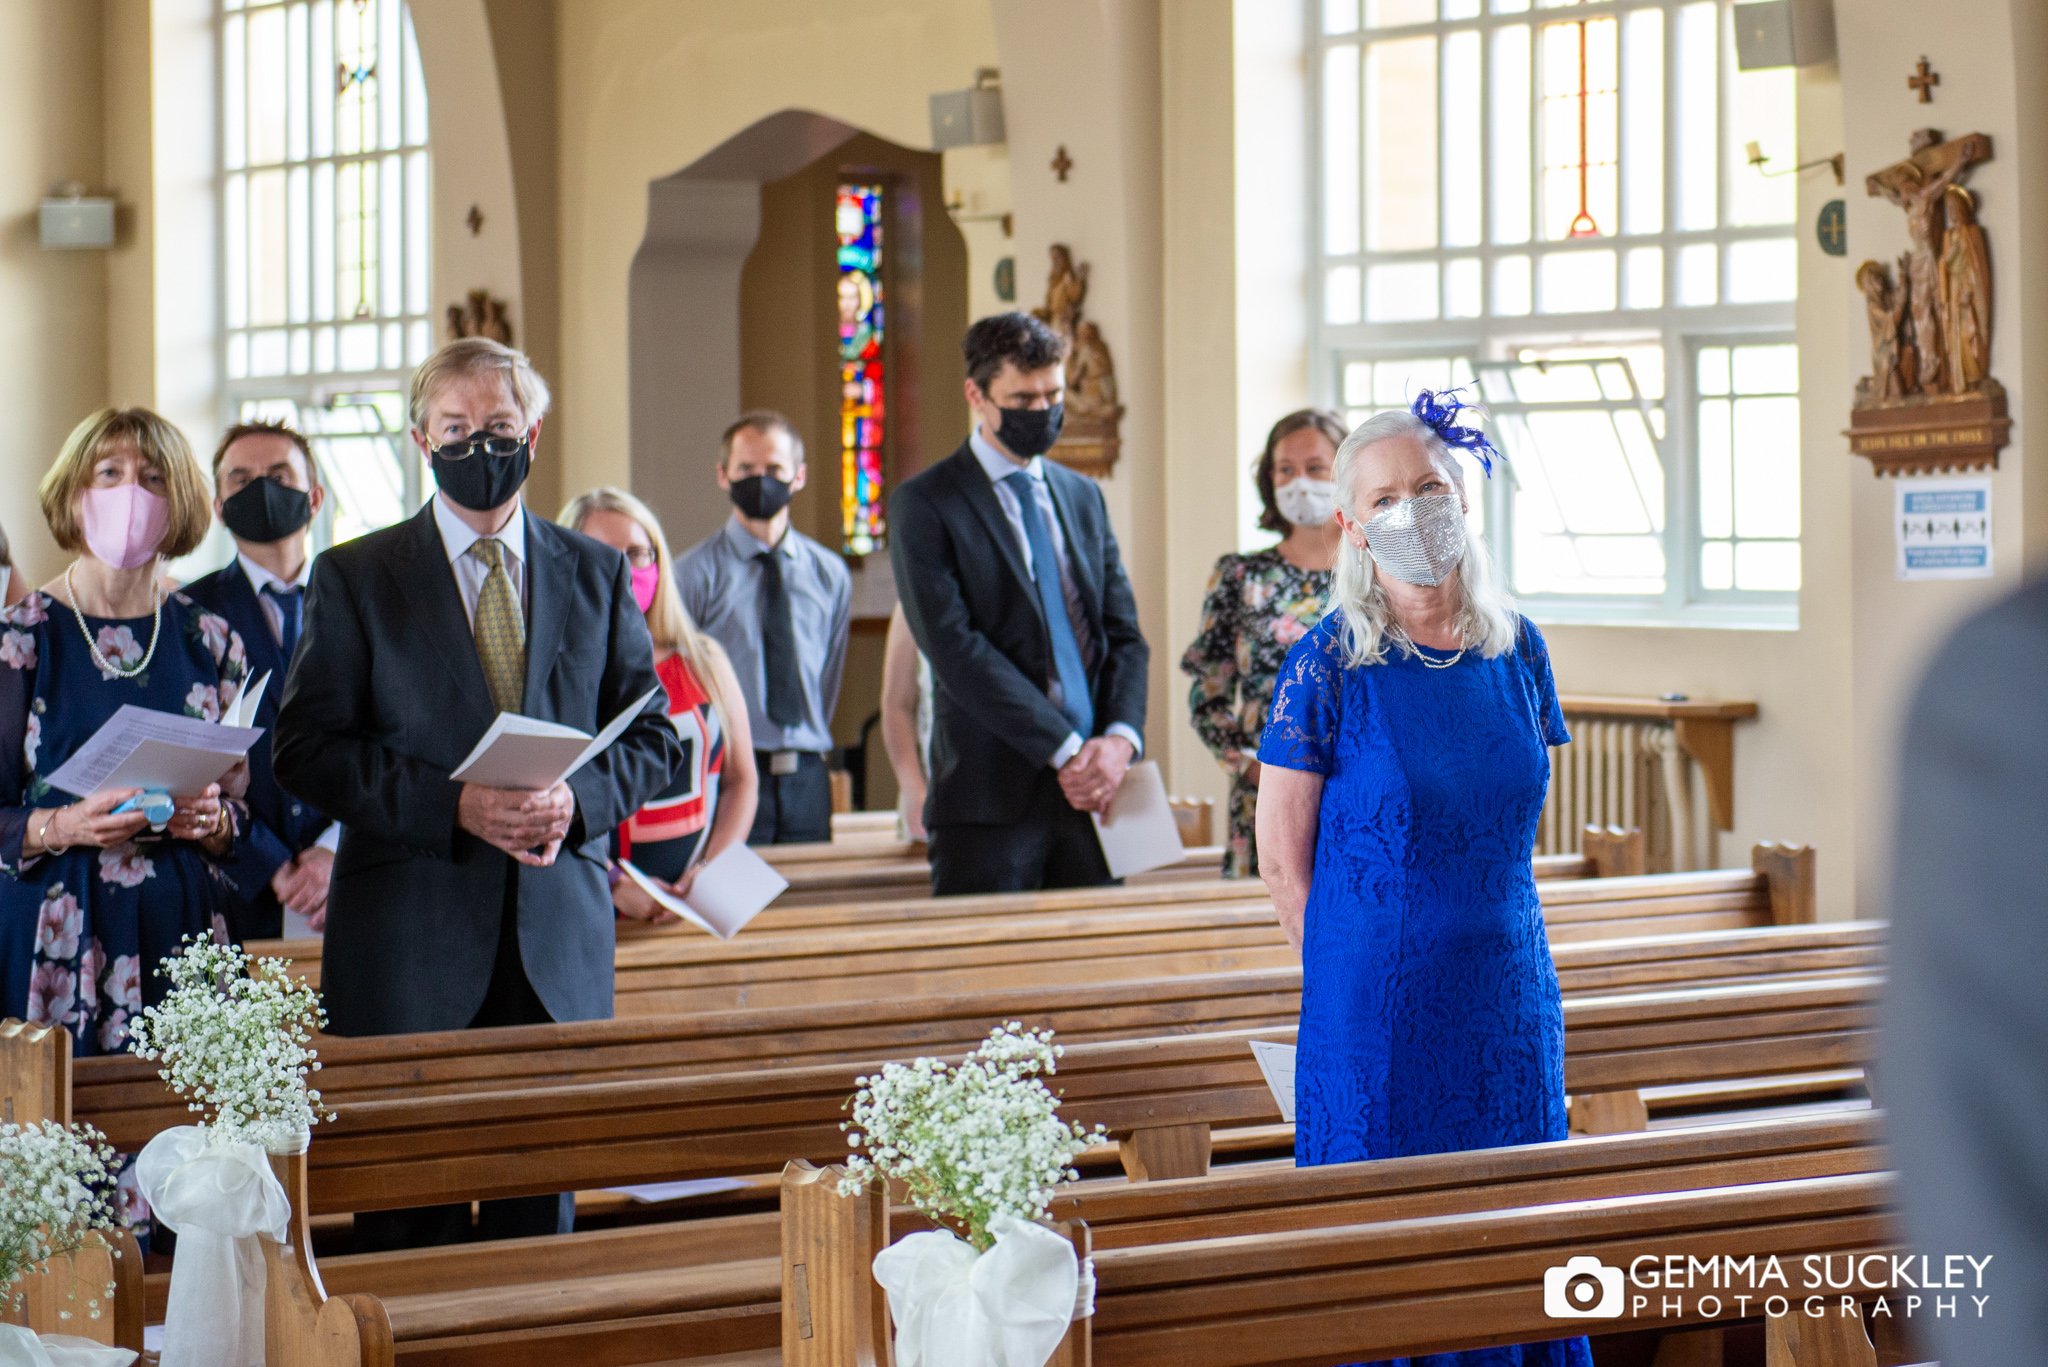 wedding guest socially distanced wearing marks in a church